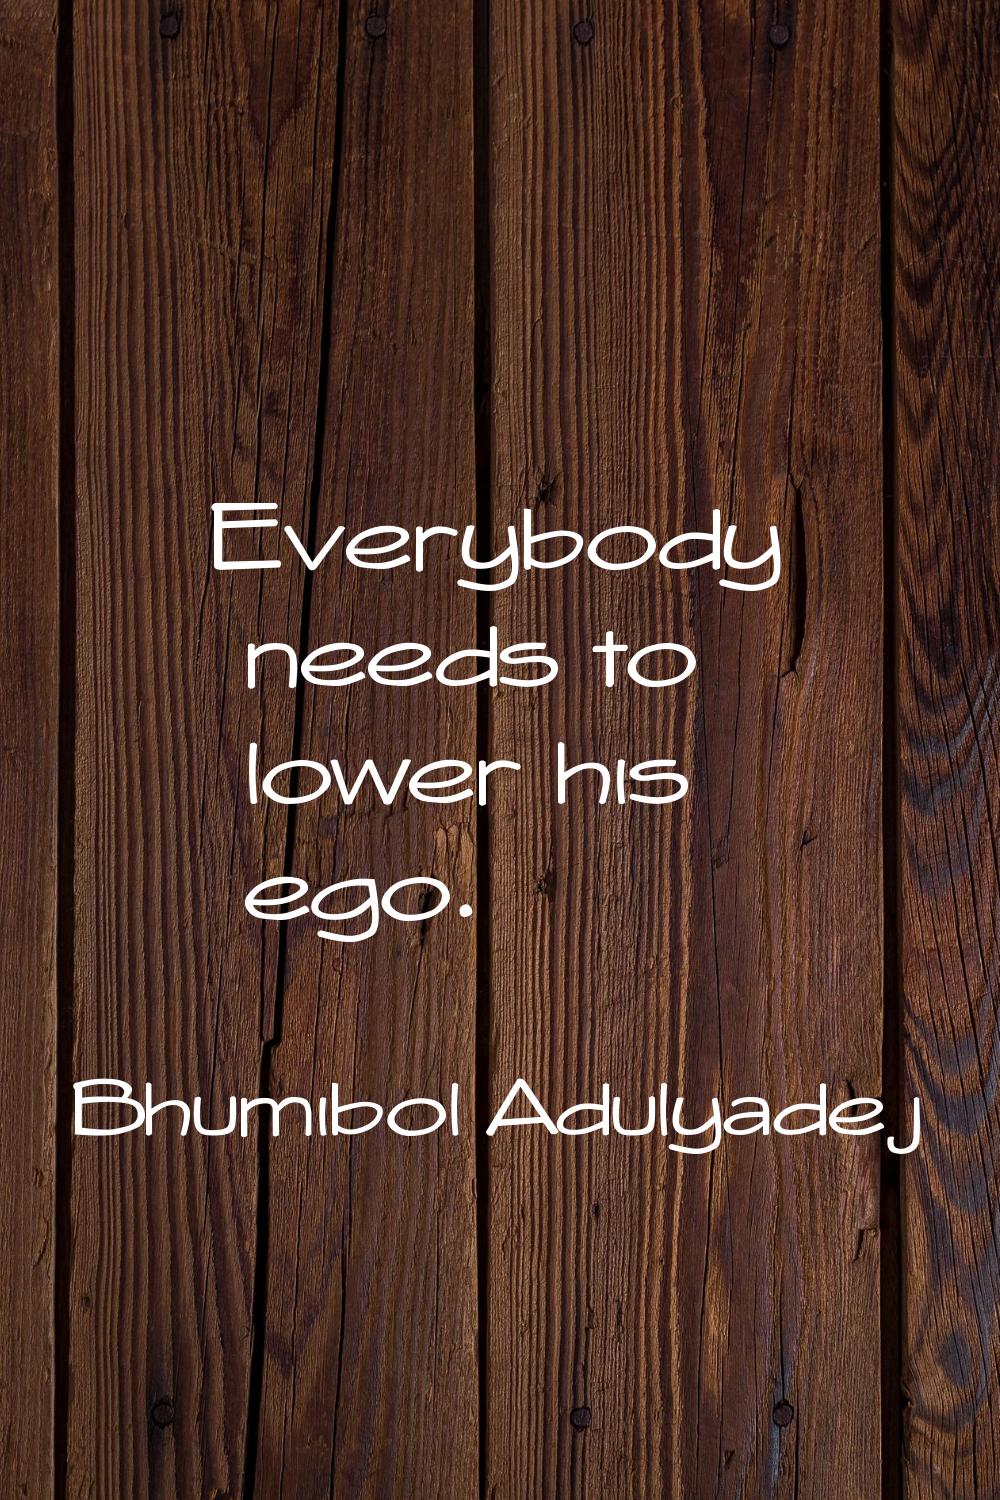 Everybody needs to lower his ego.